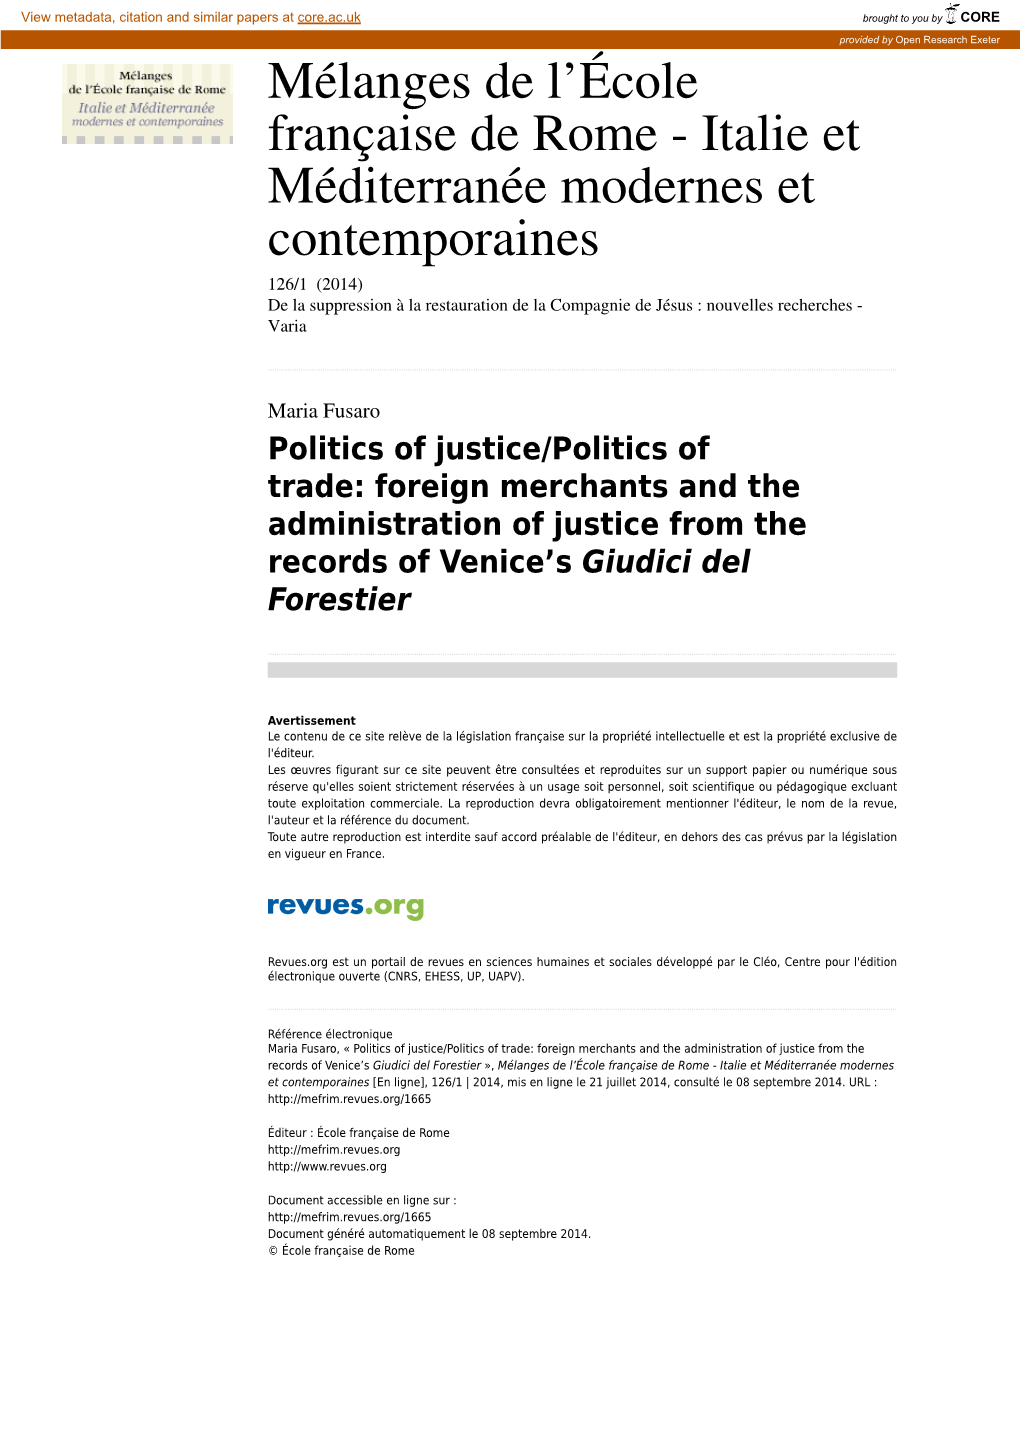 Foreign Merchants and the Administration of Justice from the Records of Venice's Giudic